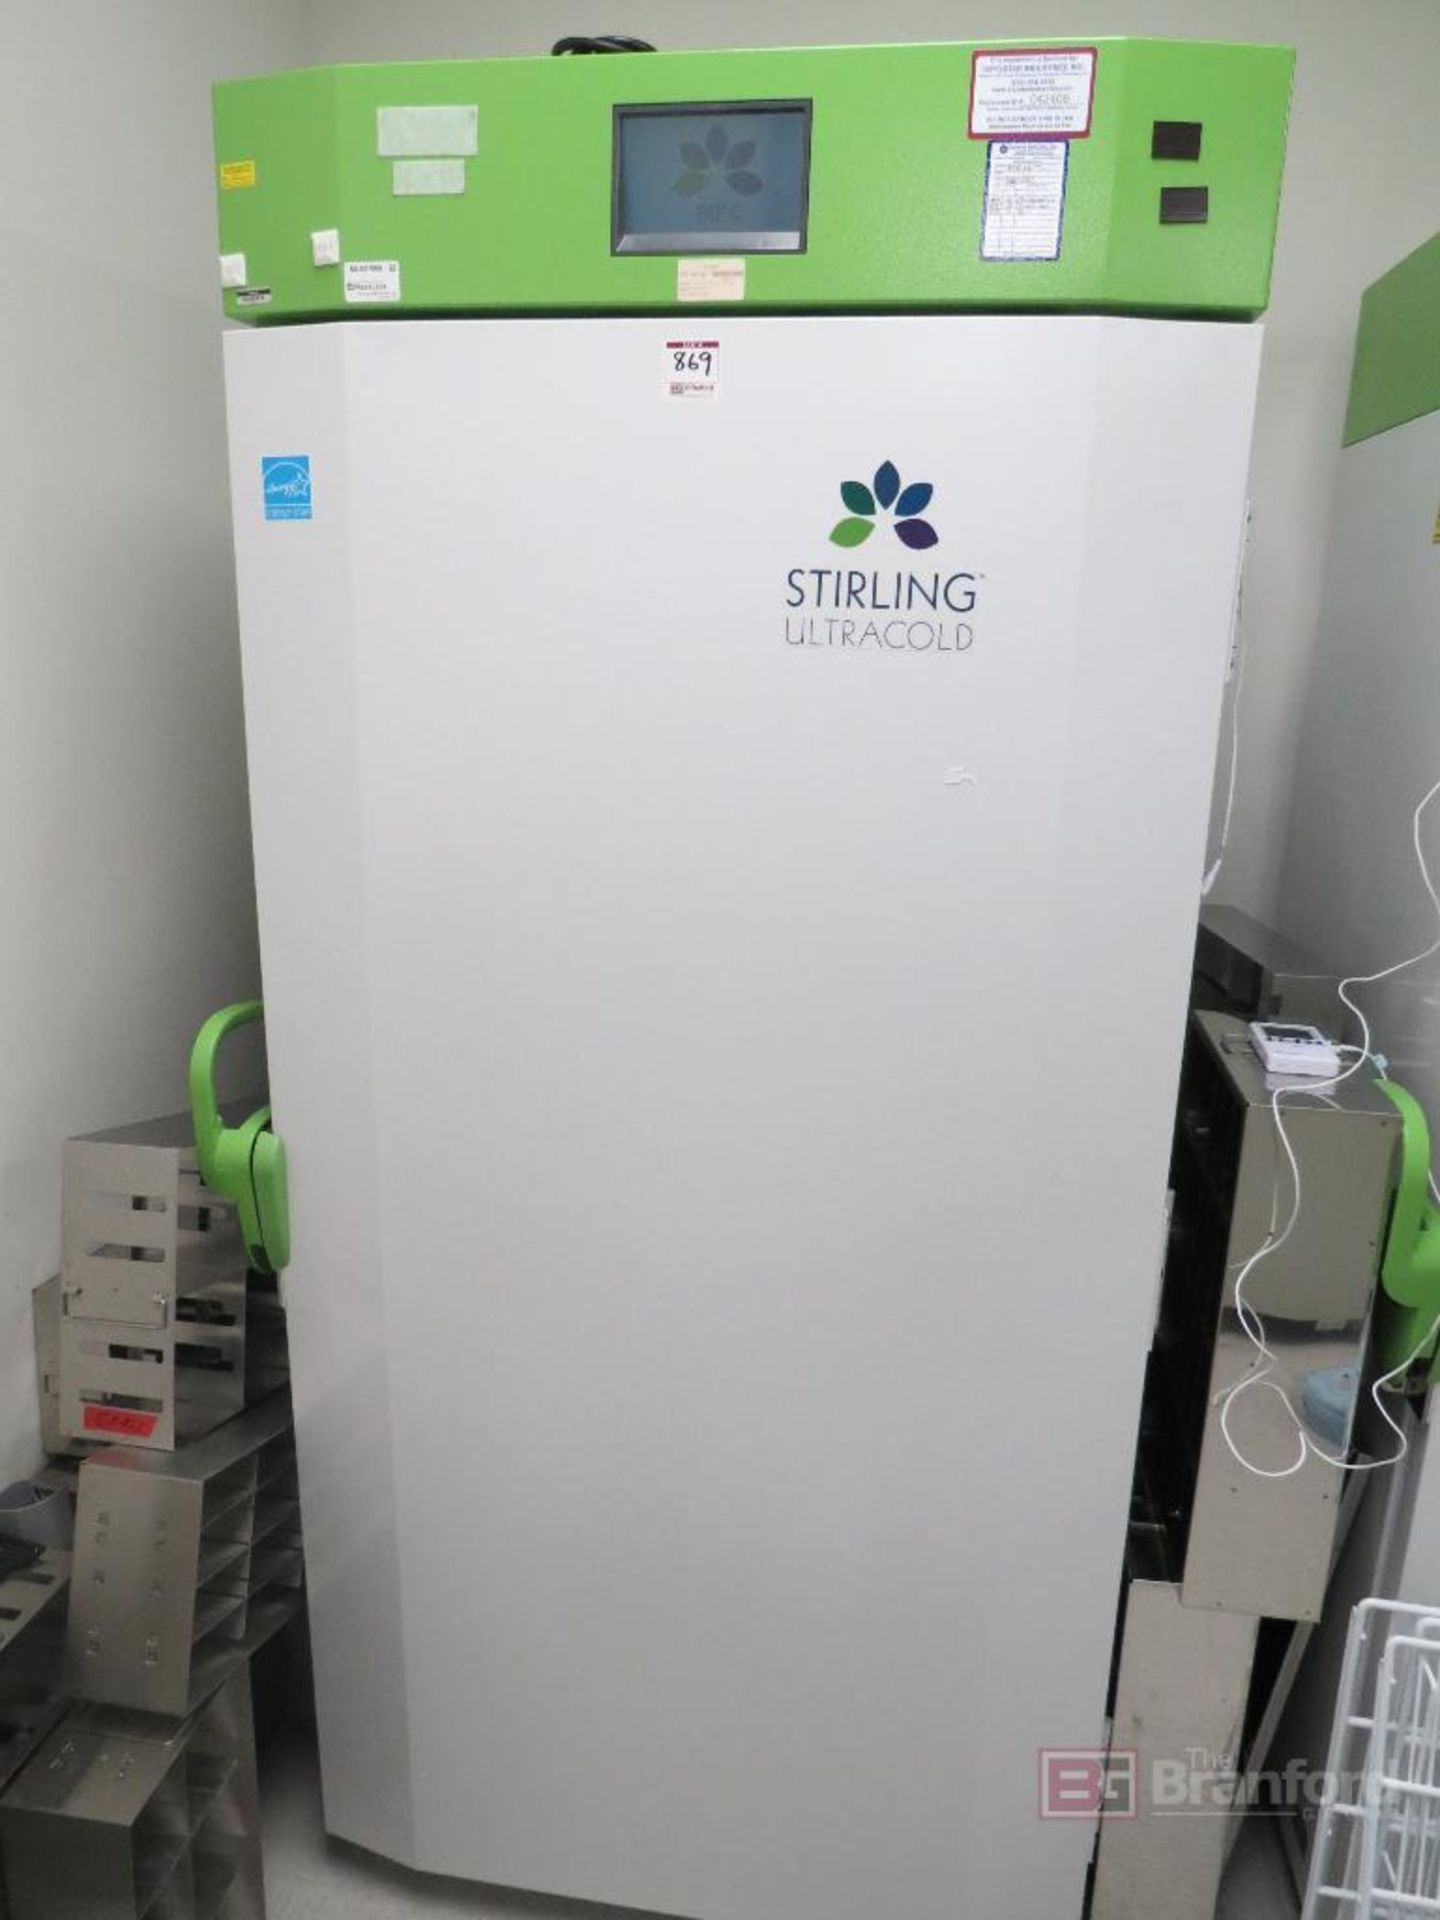 Stirling SU780XLE Ultracold -86°C Ultra Low Freezer